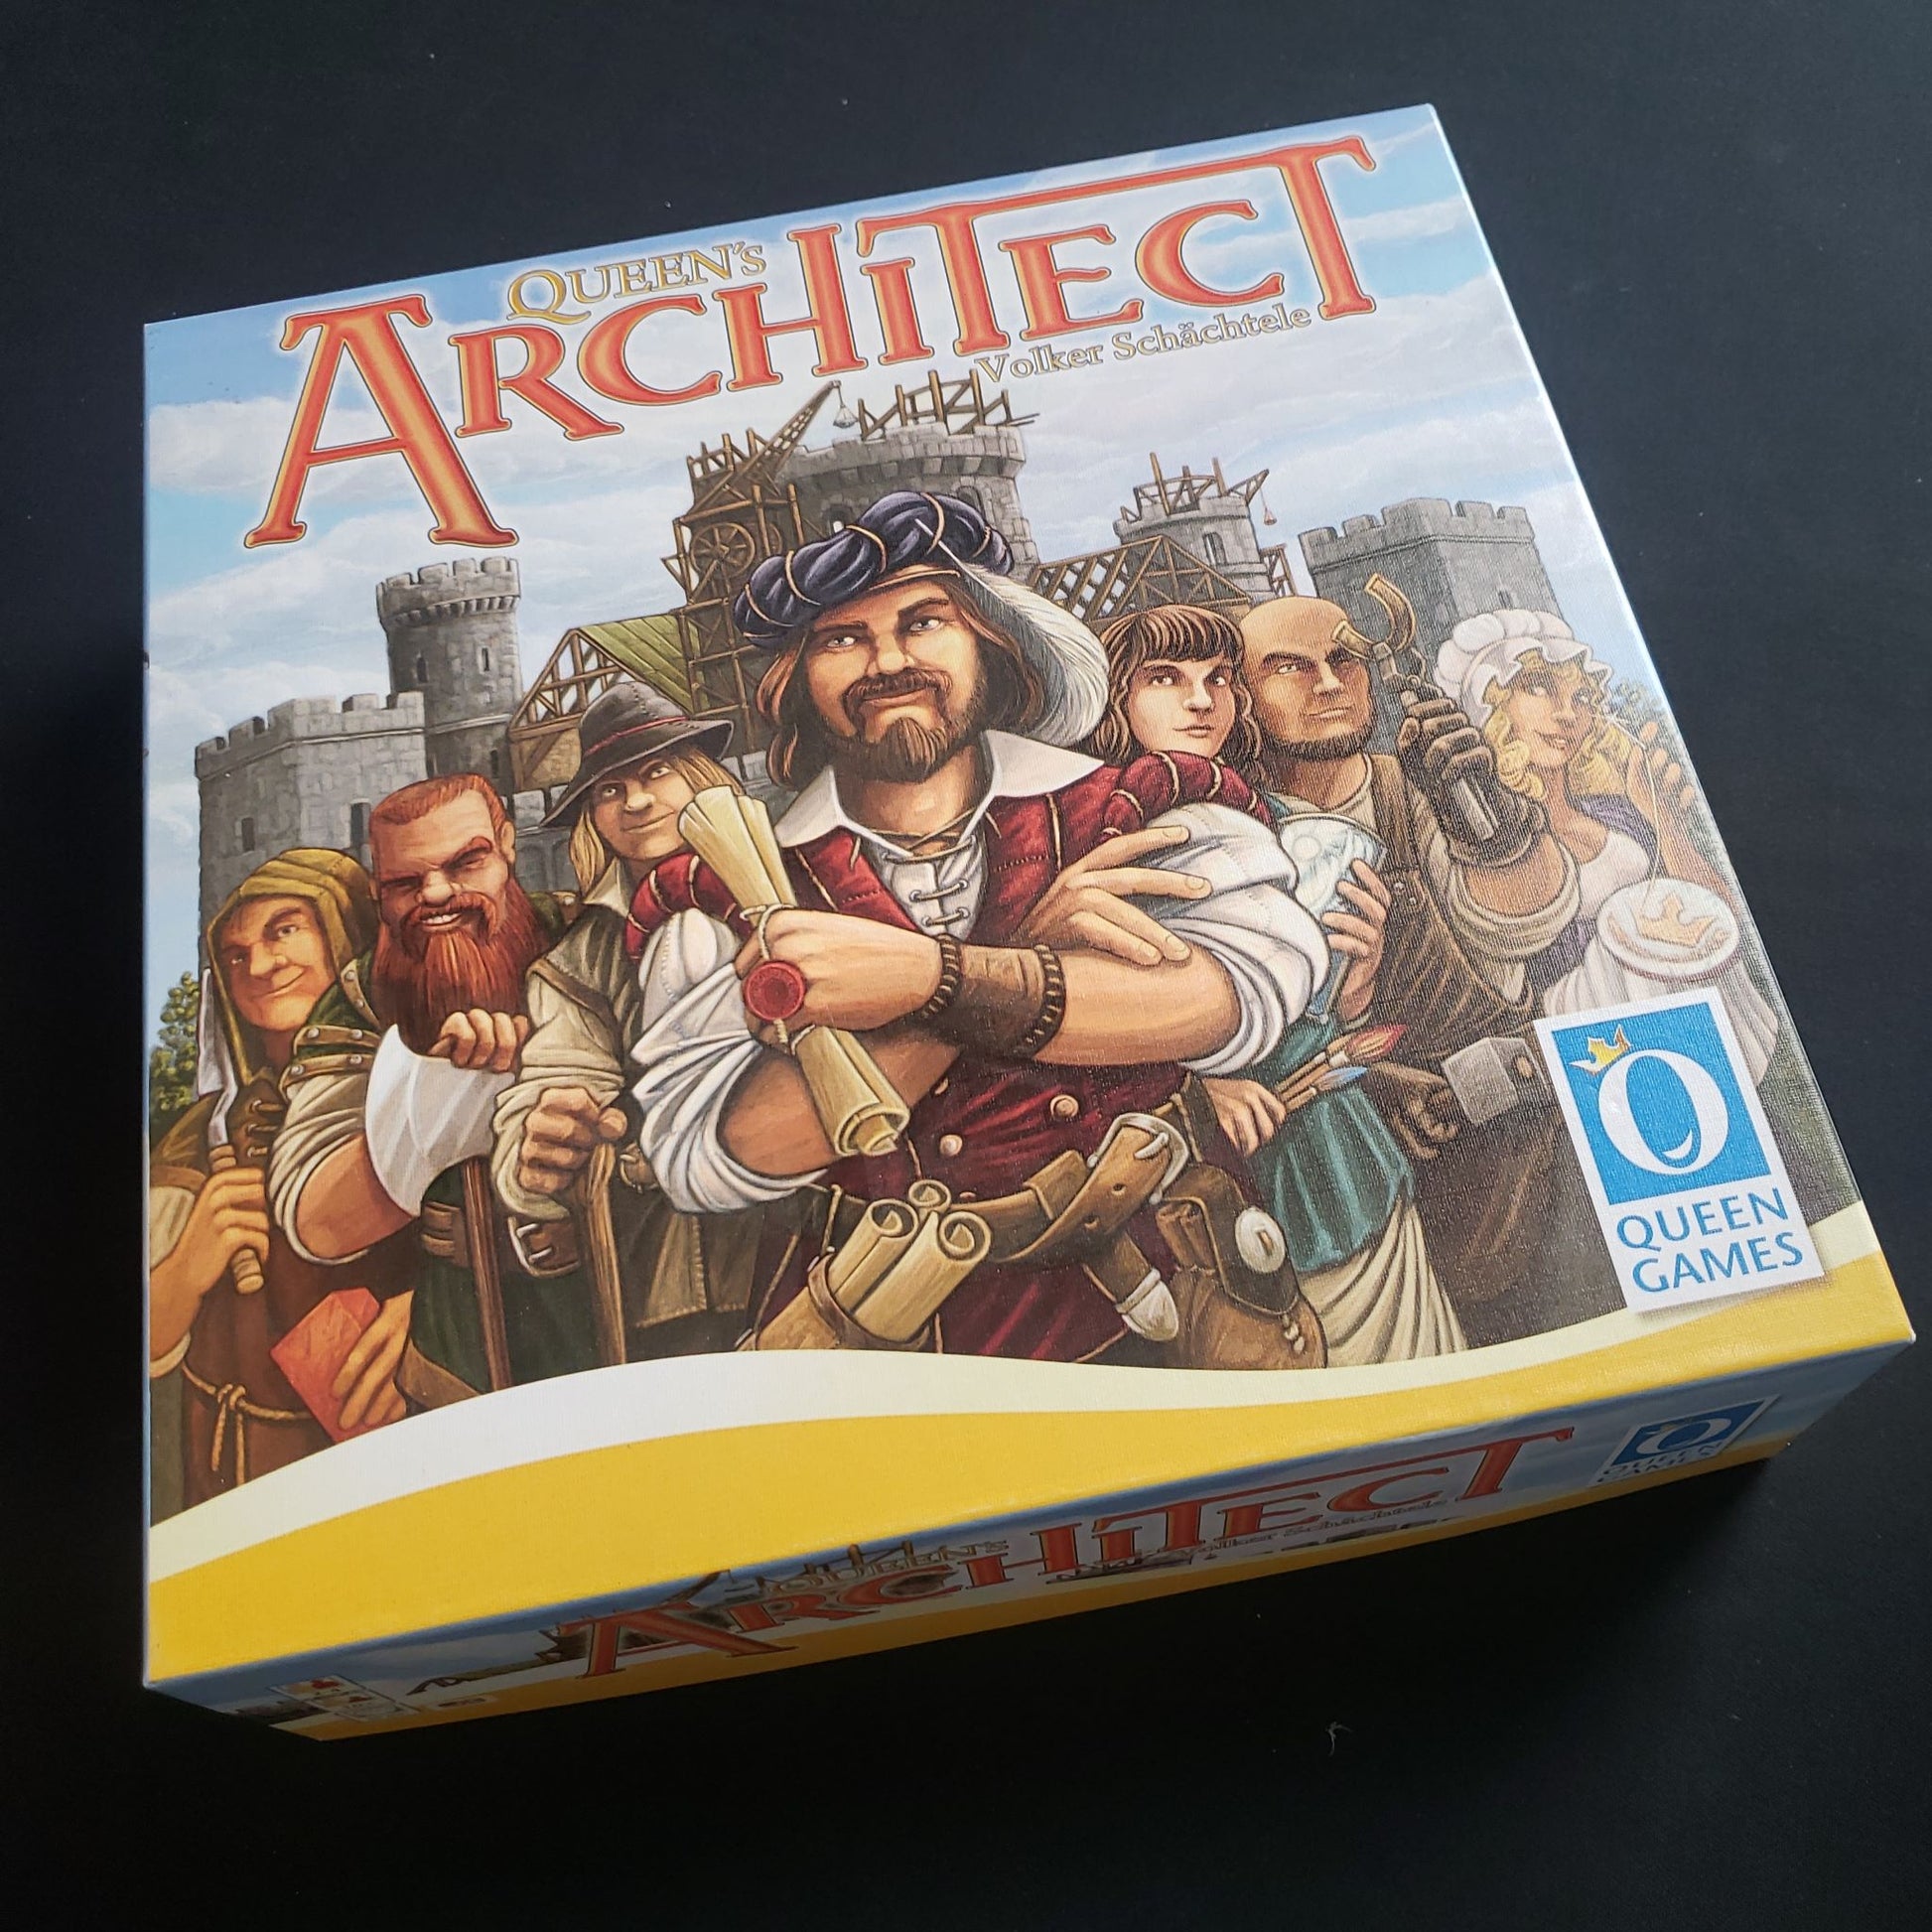 Queen's Architect board game - front cover of box